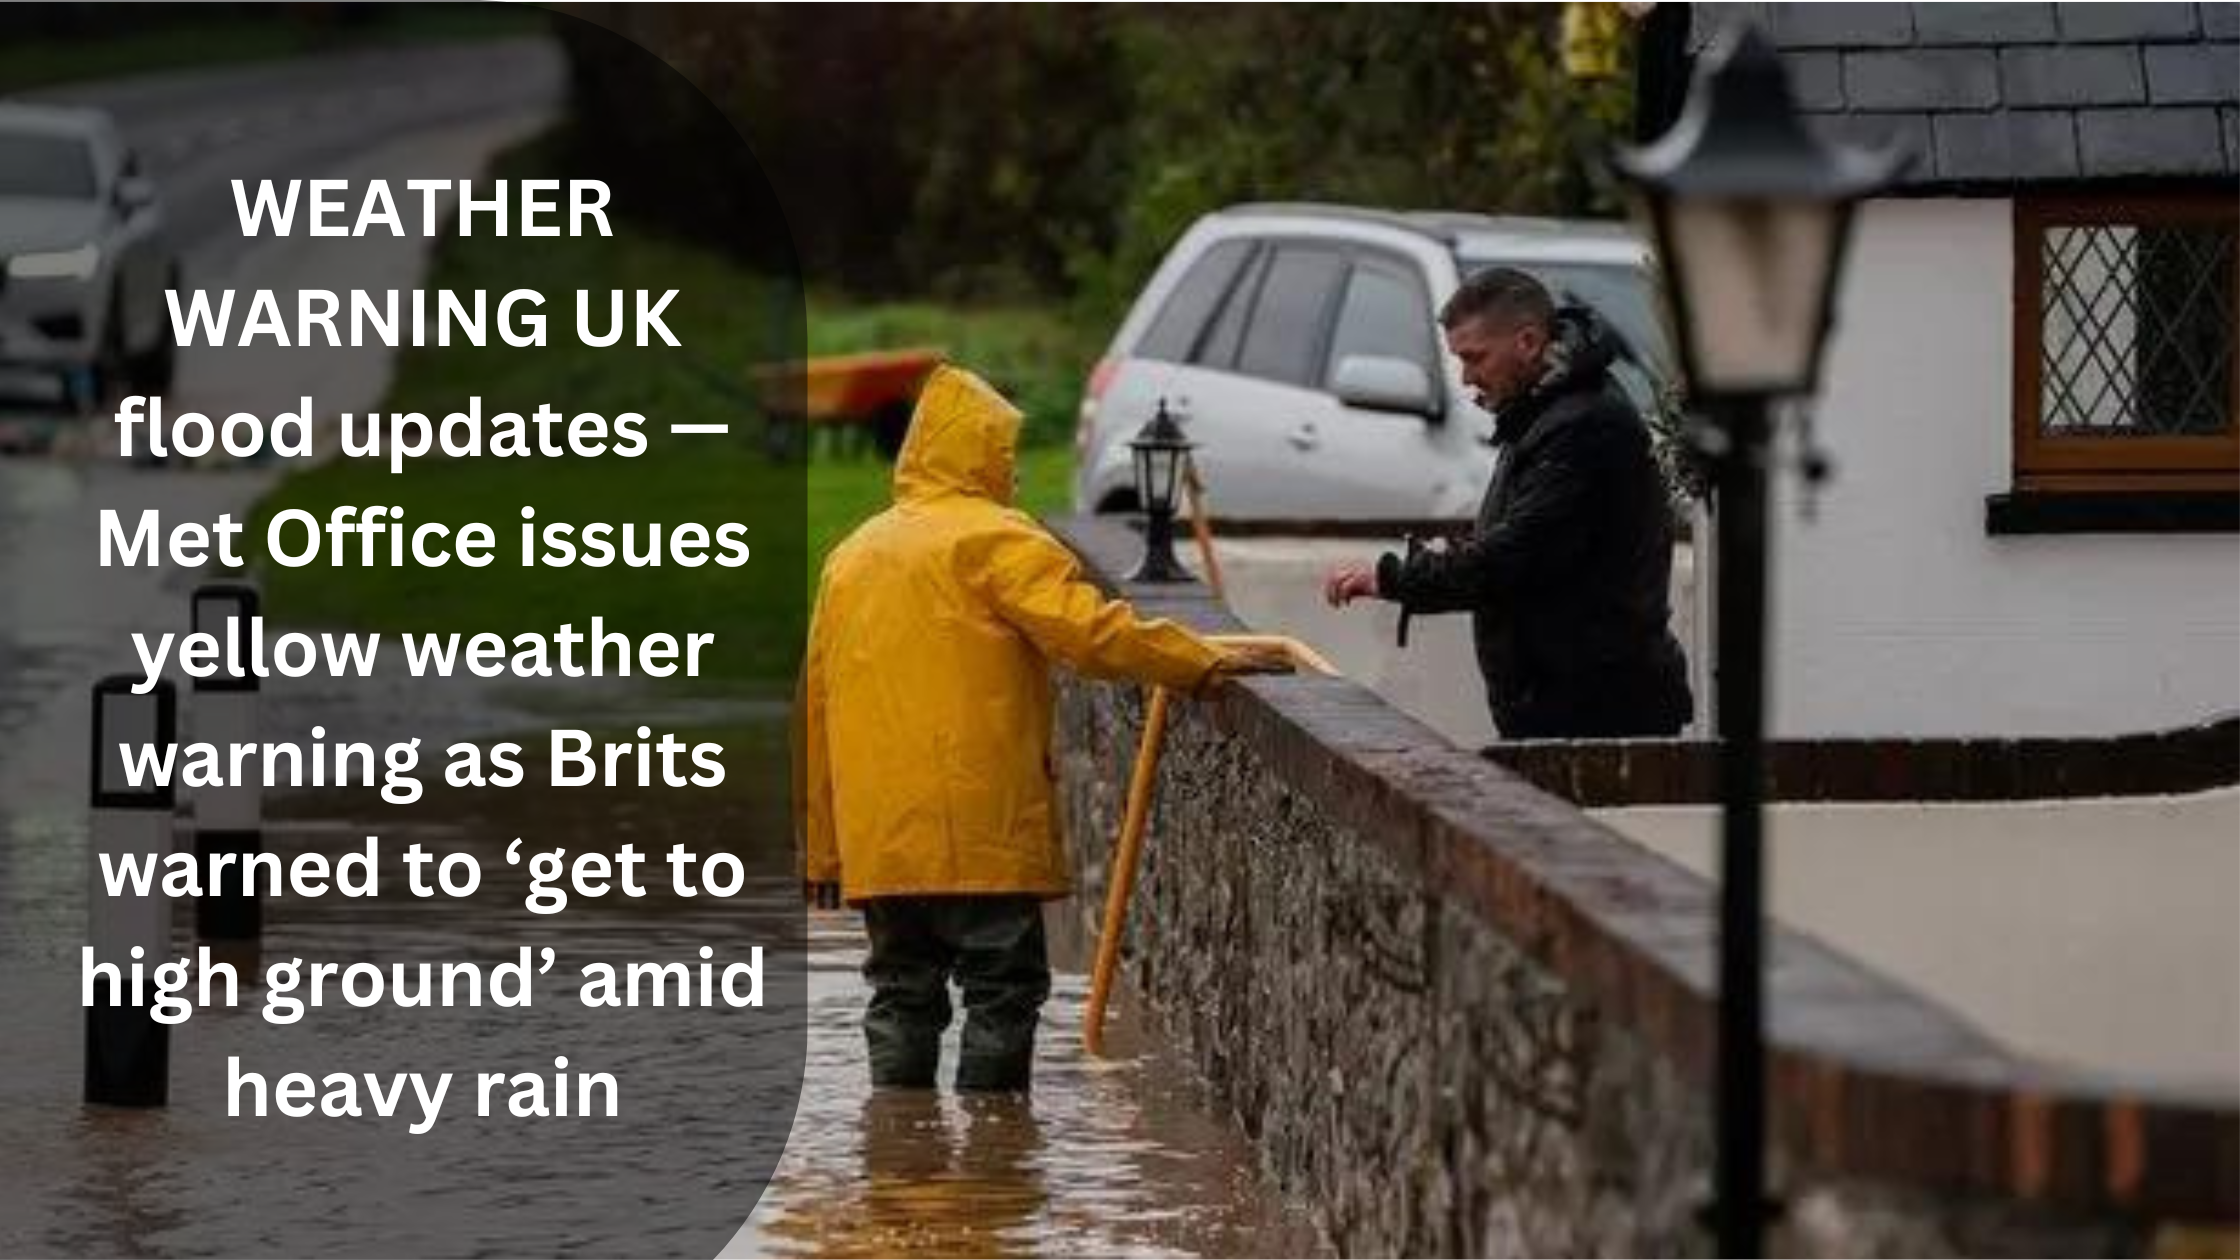 WEATHER WARNING UK flood updates — Met Office issues yellow weather warning as Brits warned to ‘get to high ground’ amid heavy rain 